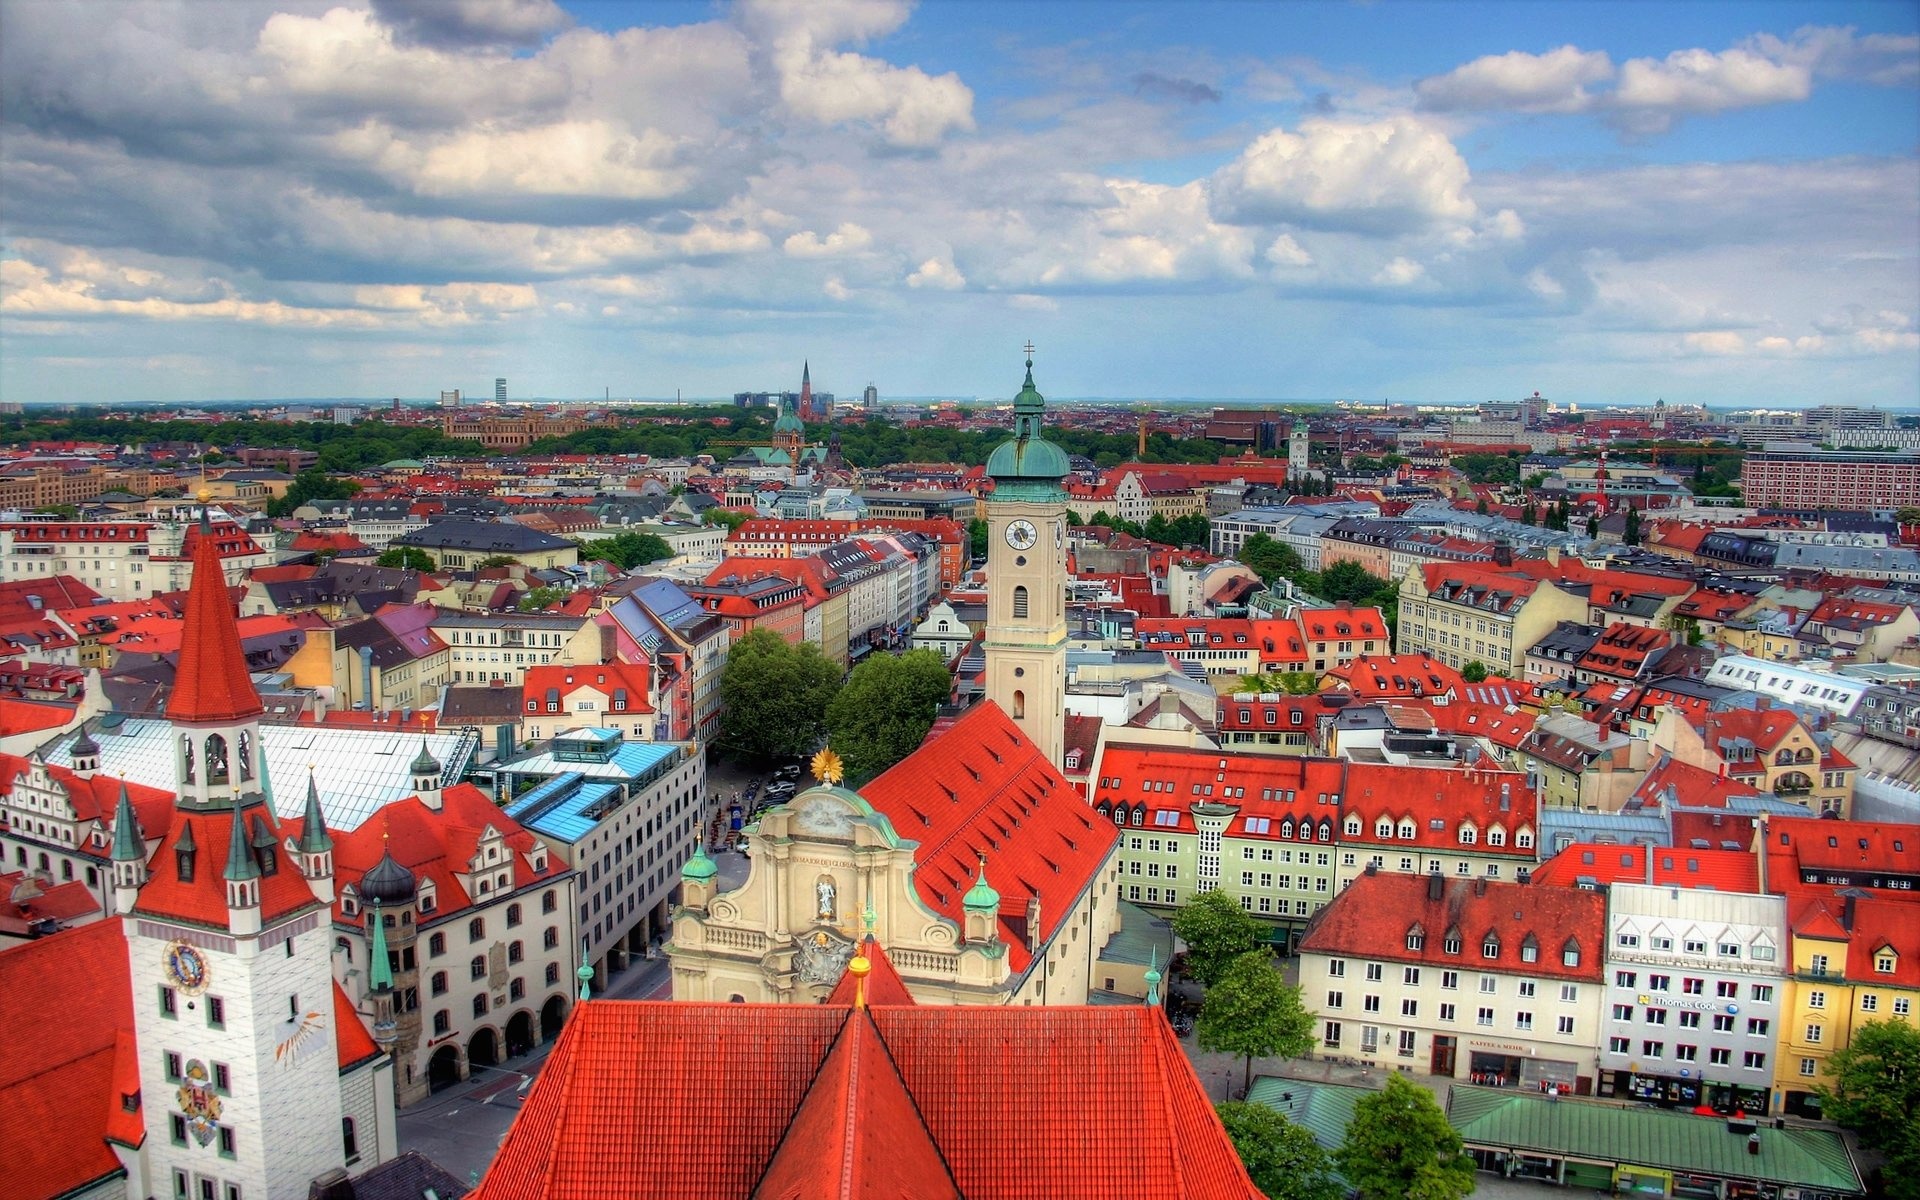 Munich: The city is located in southern Germany and serves as the capital city of Bavaria state. 1920x1200 HD Background.